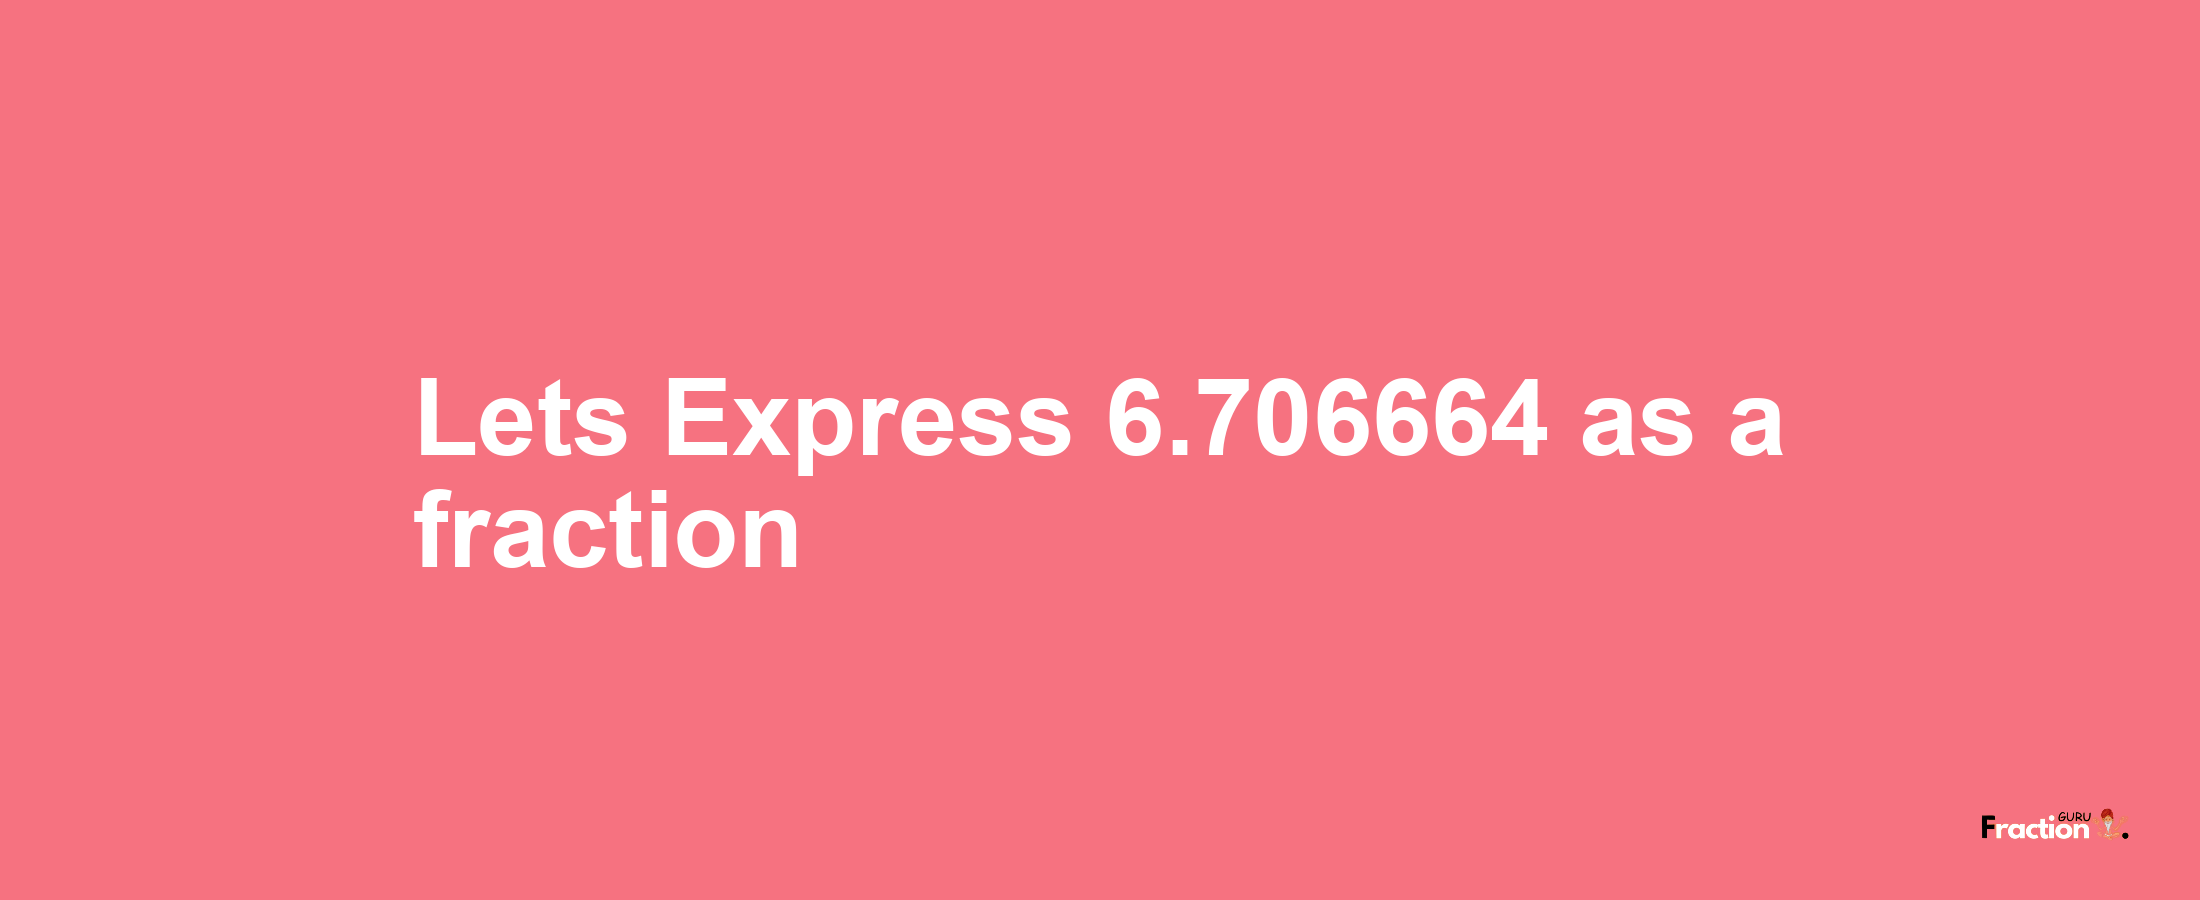 Lets Express 6.706664 as afraction